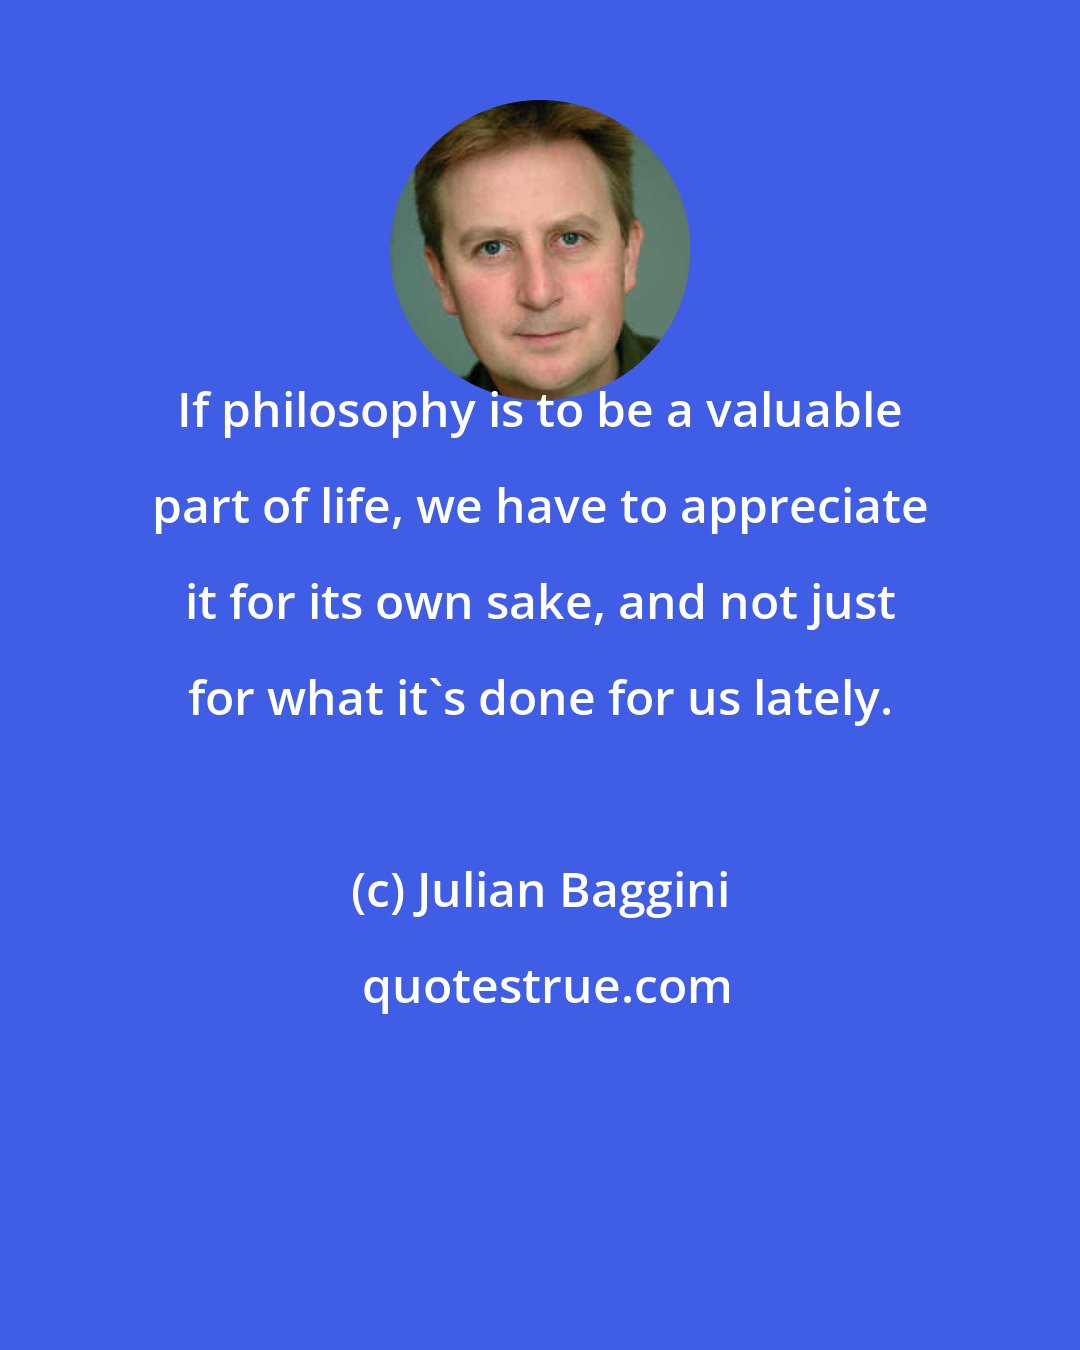 Julian Baggini: If philosophy is to be a valuable part of life, we have to appreciate it for its own sake, and not just for what it's done for us lately.